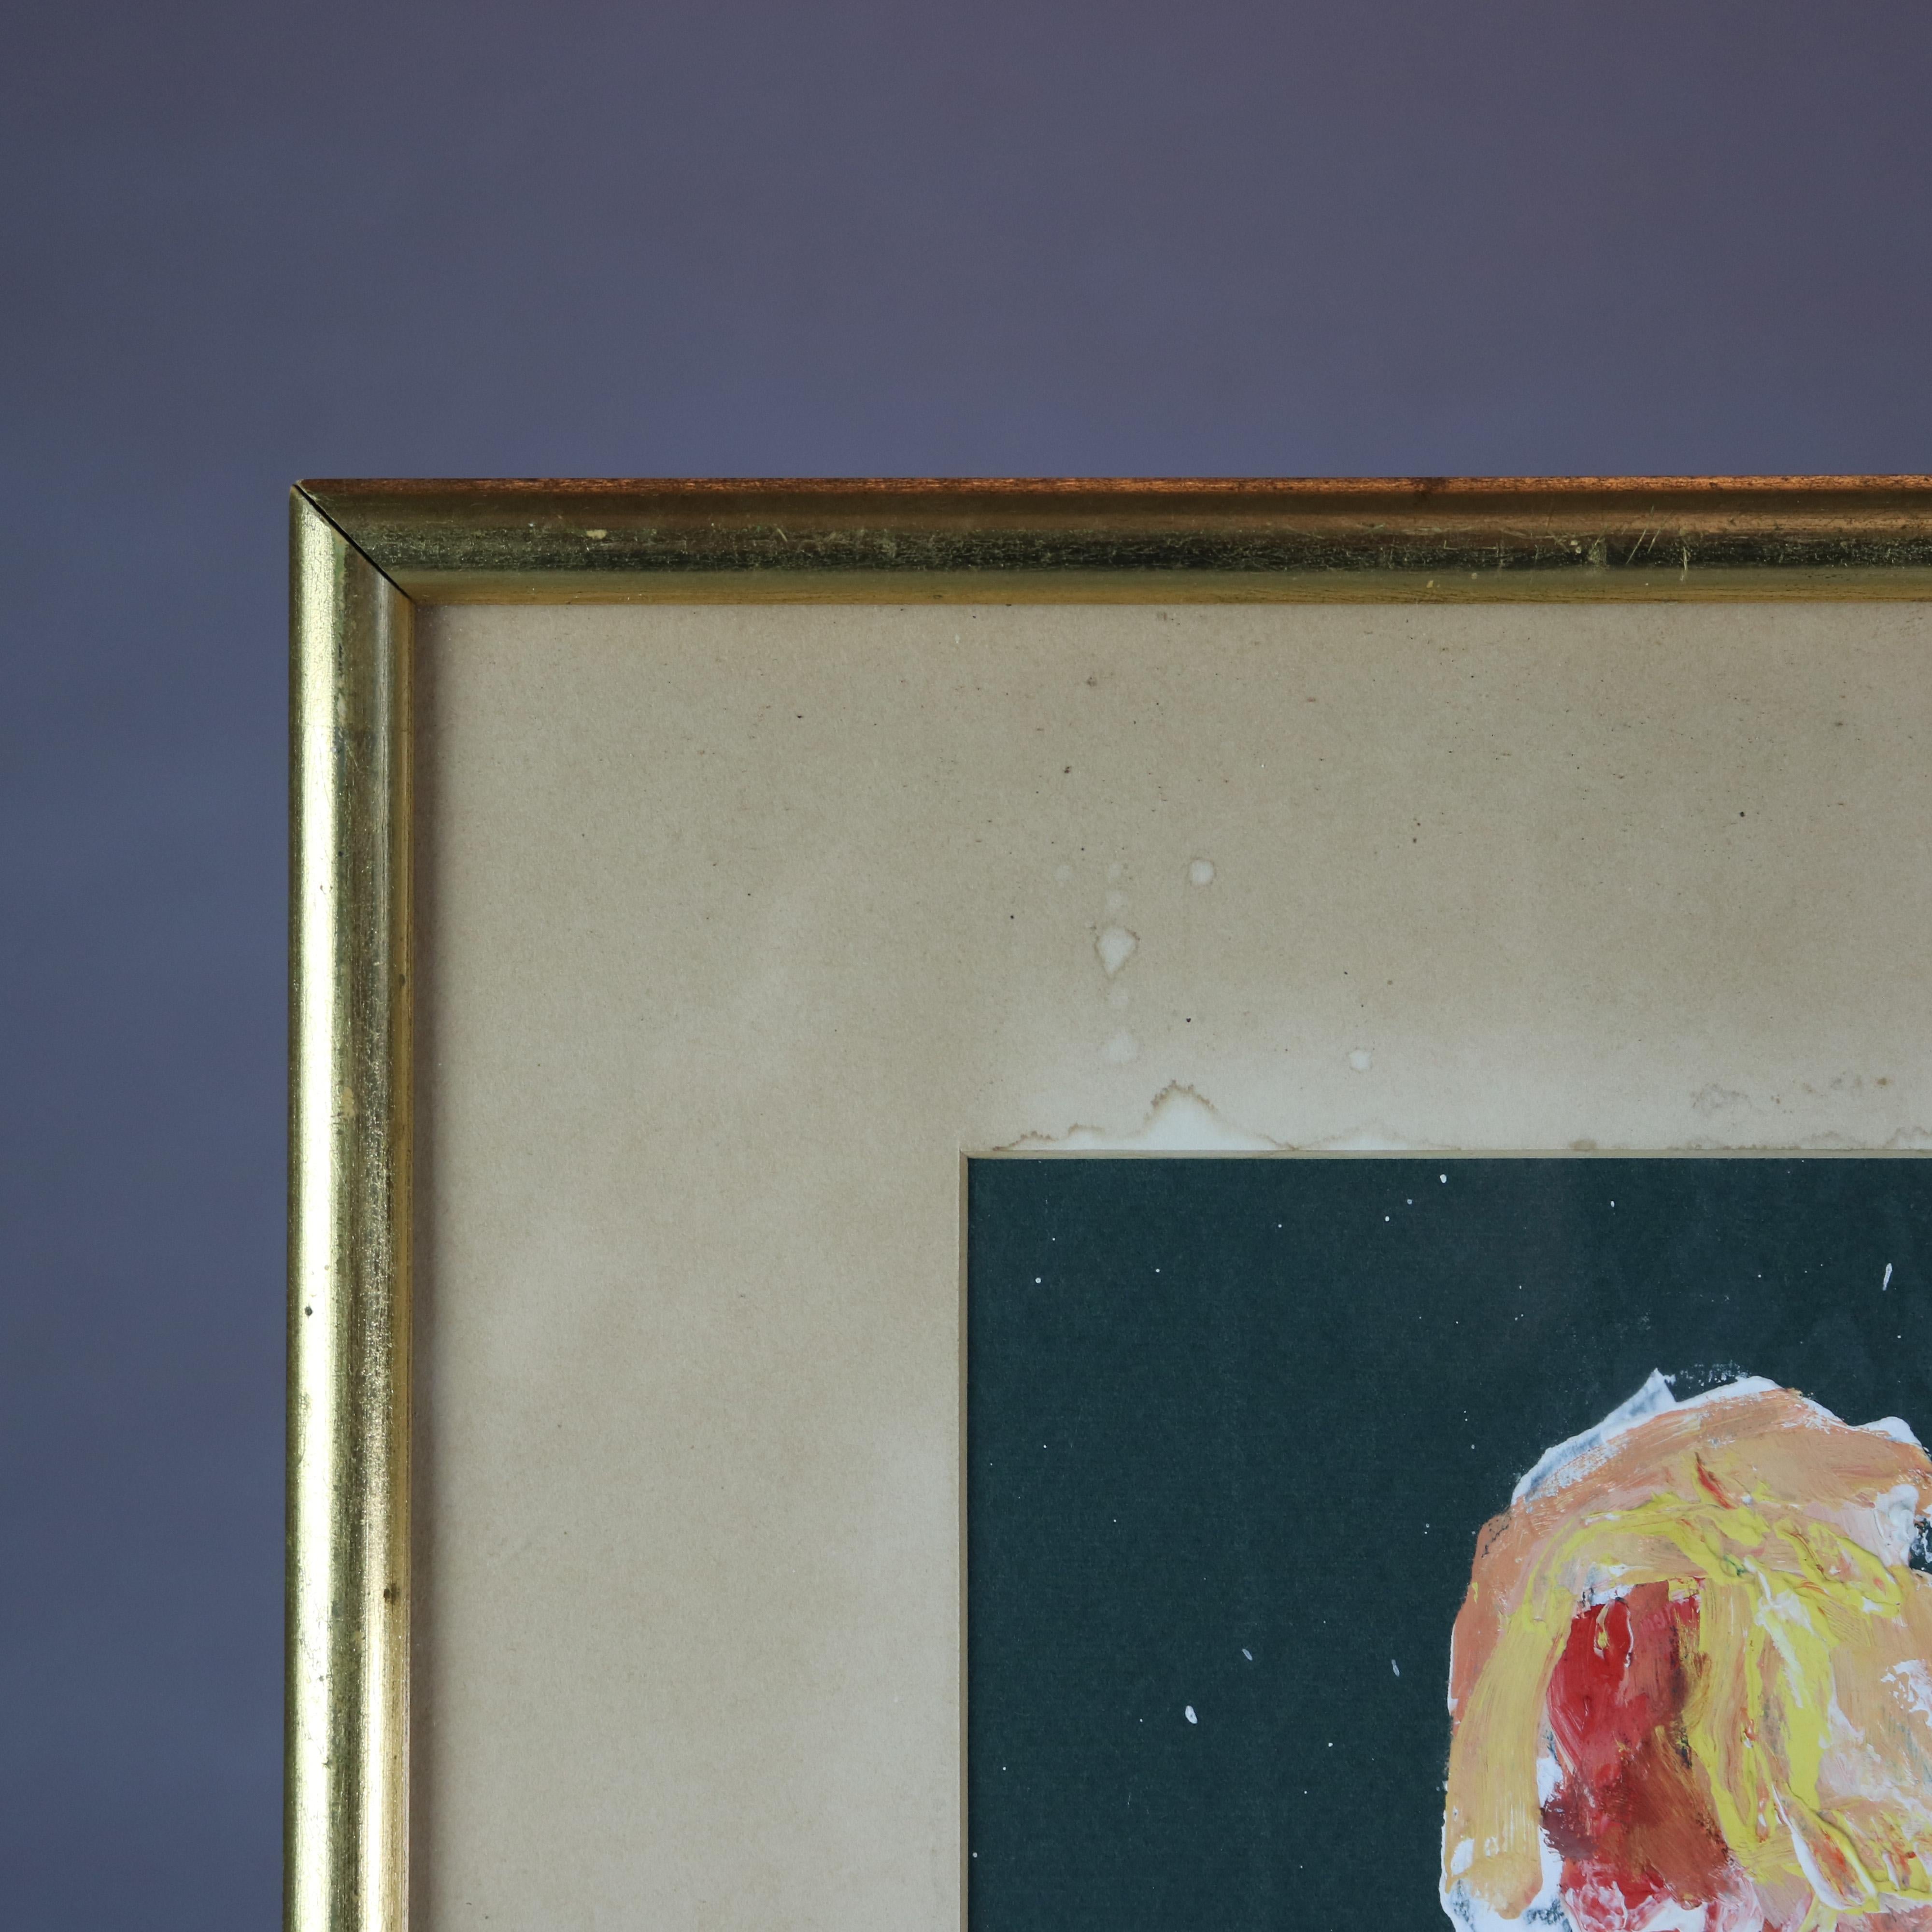 Wood Mid-Century Modern Abstract Oil Painting, Nude Portrait by Skipper Mize, c1960 For Sale